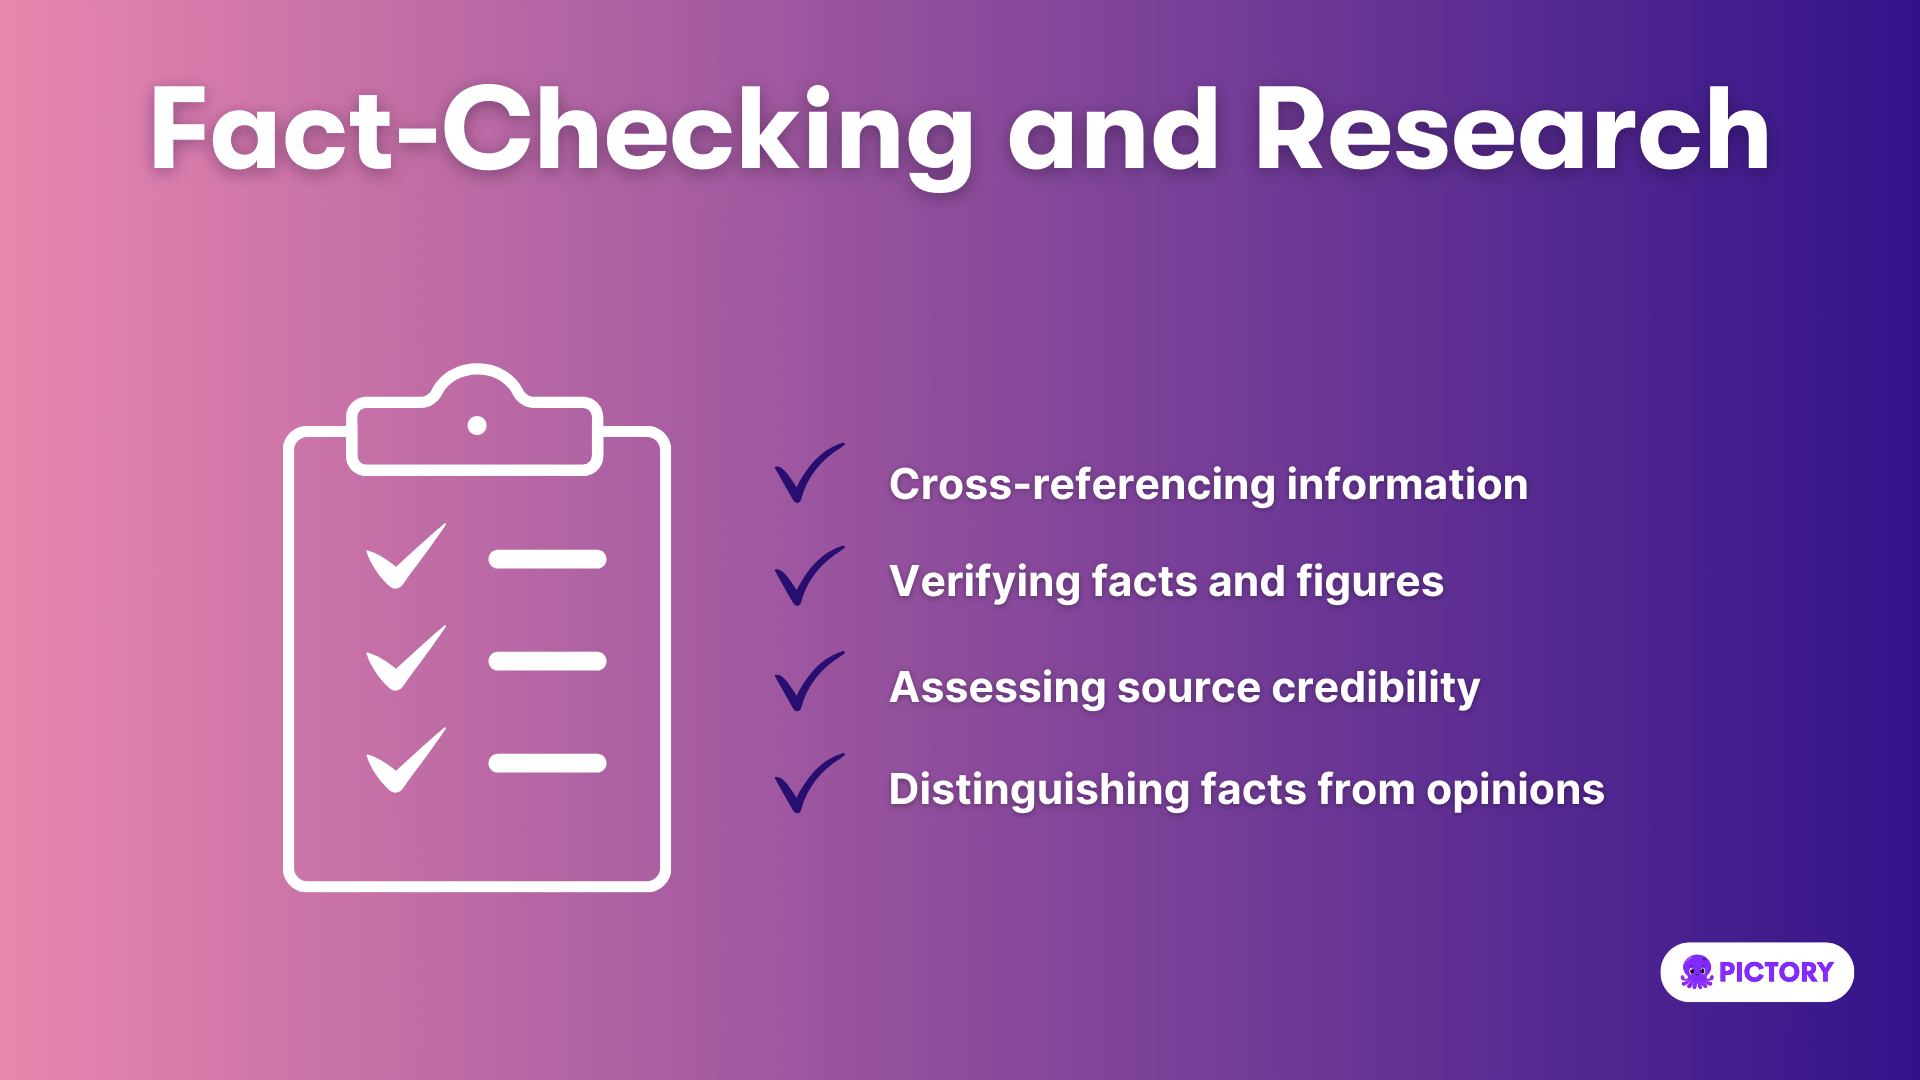 Fact-Checking and Research